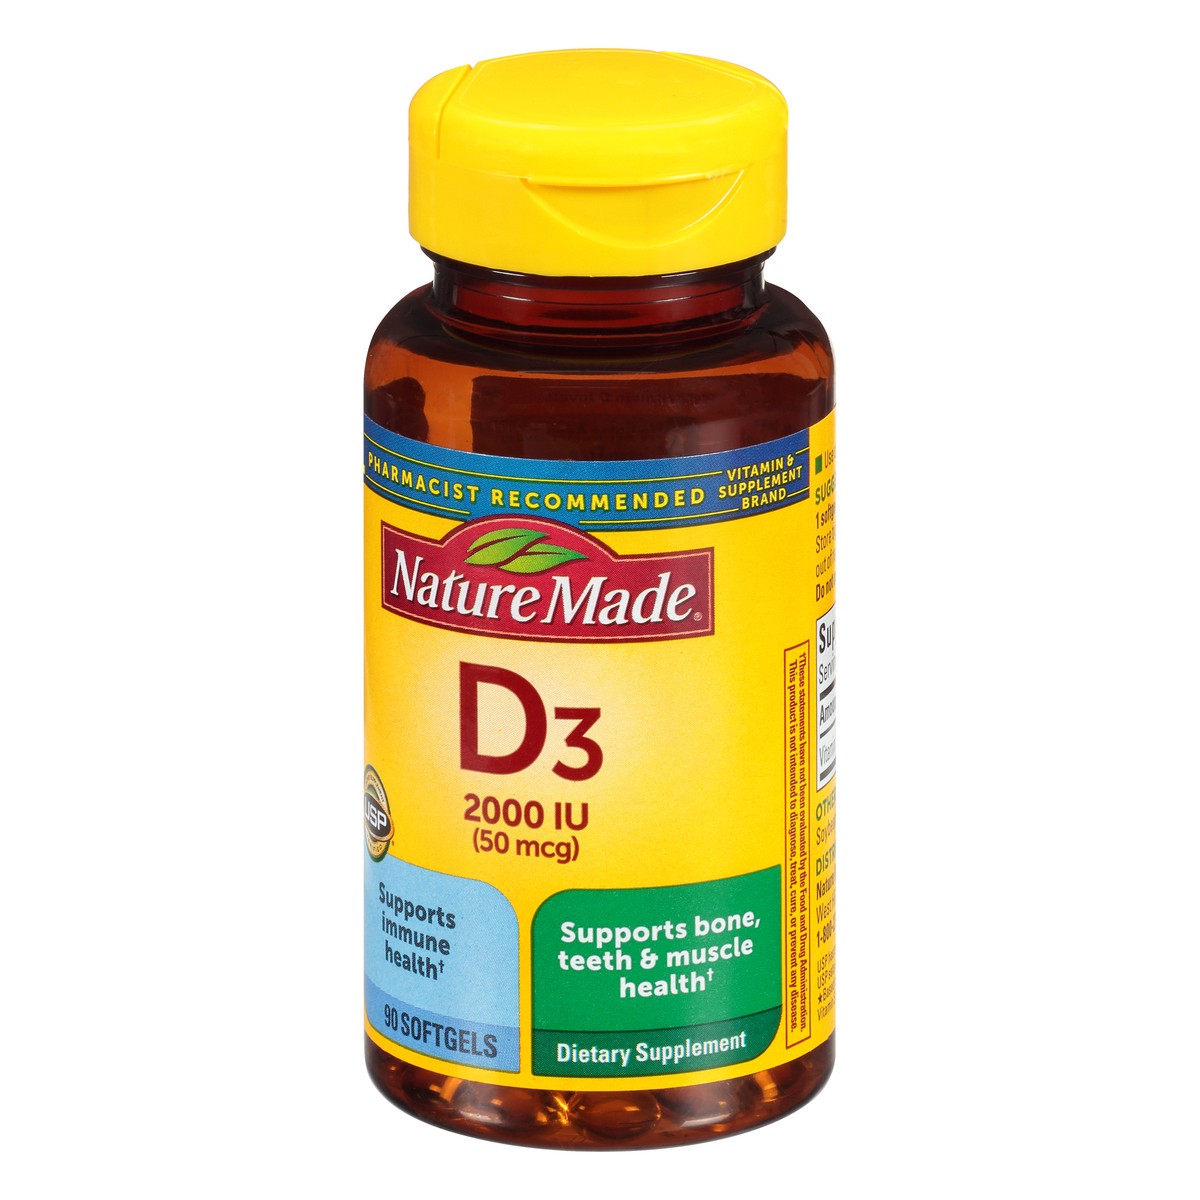 slide 10 of 10, Nature Made Vitamin D3 2000 IU (50 mcg), Dietary Supplement for Bone, Teeth, Muscle and Immune Health Support, 90 Softgels, 90 Day Supply, 90 ct